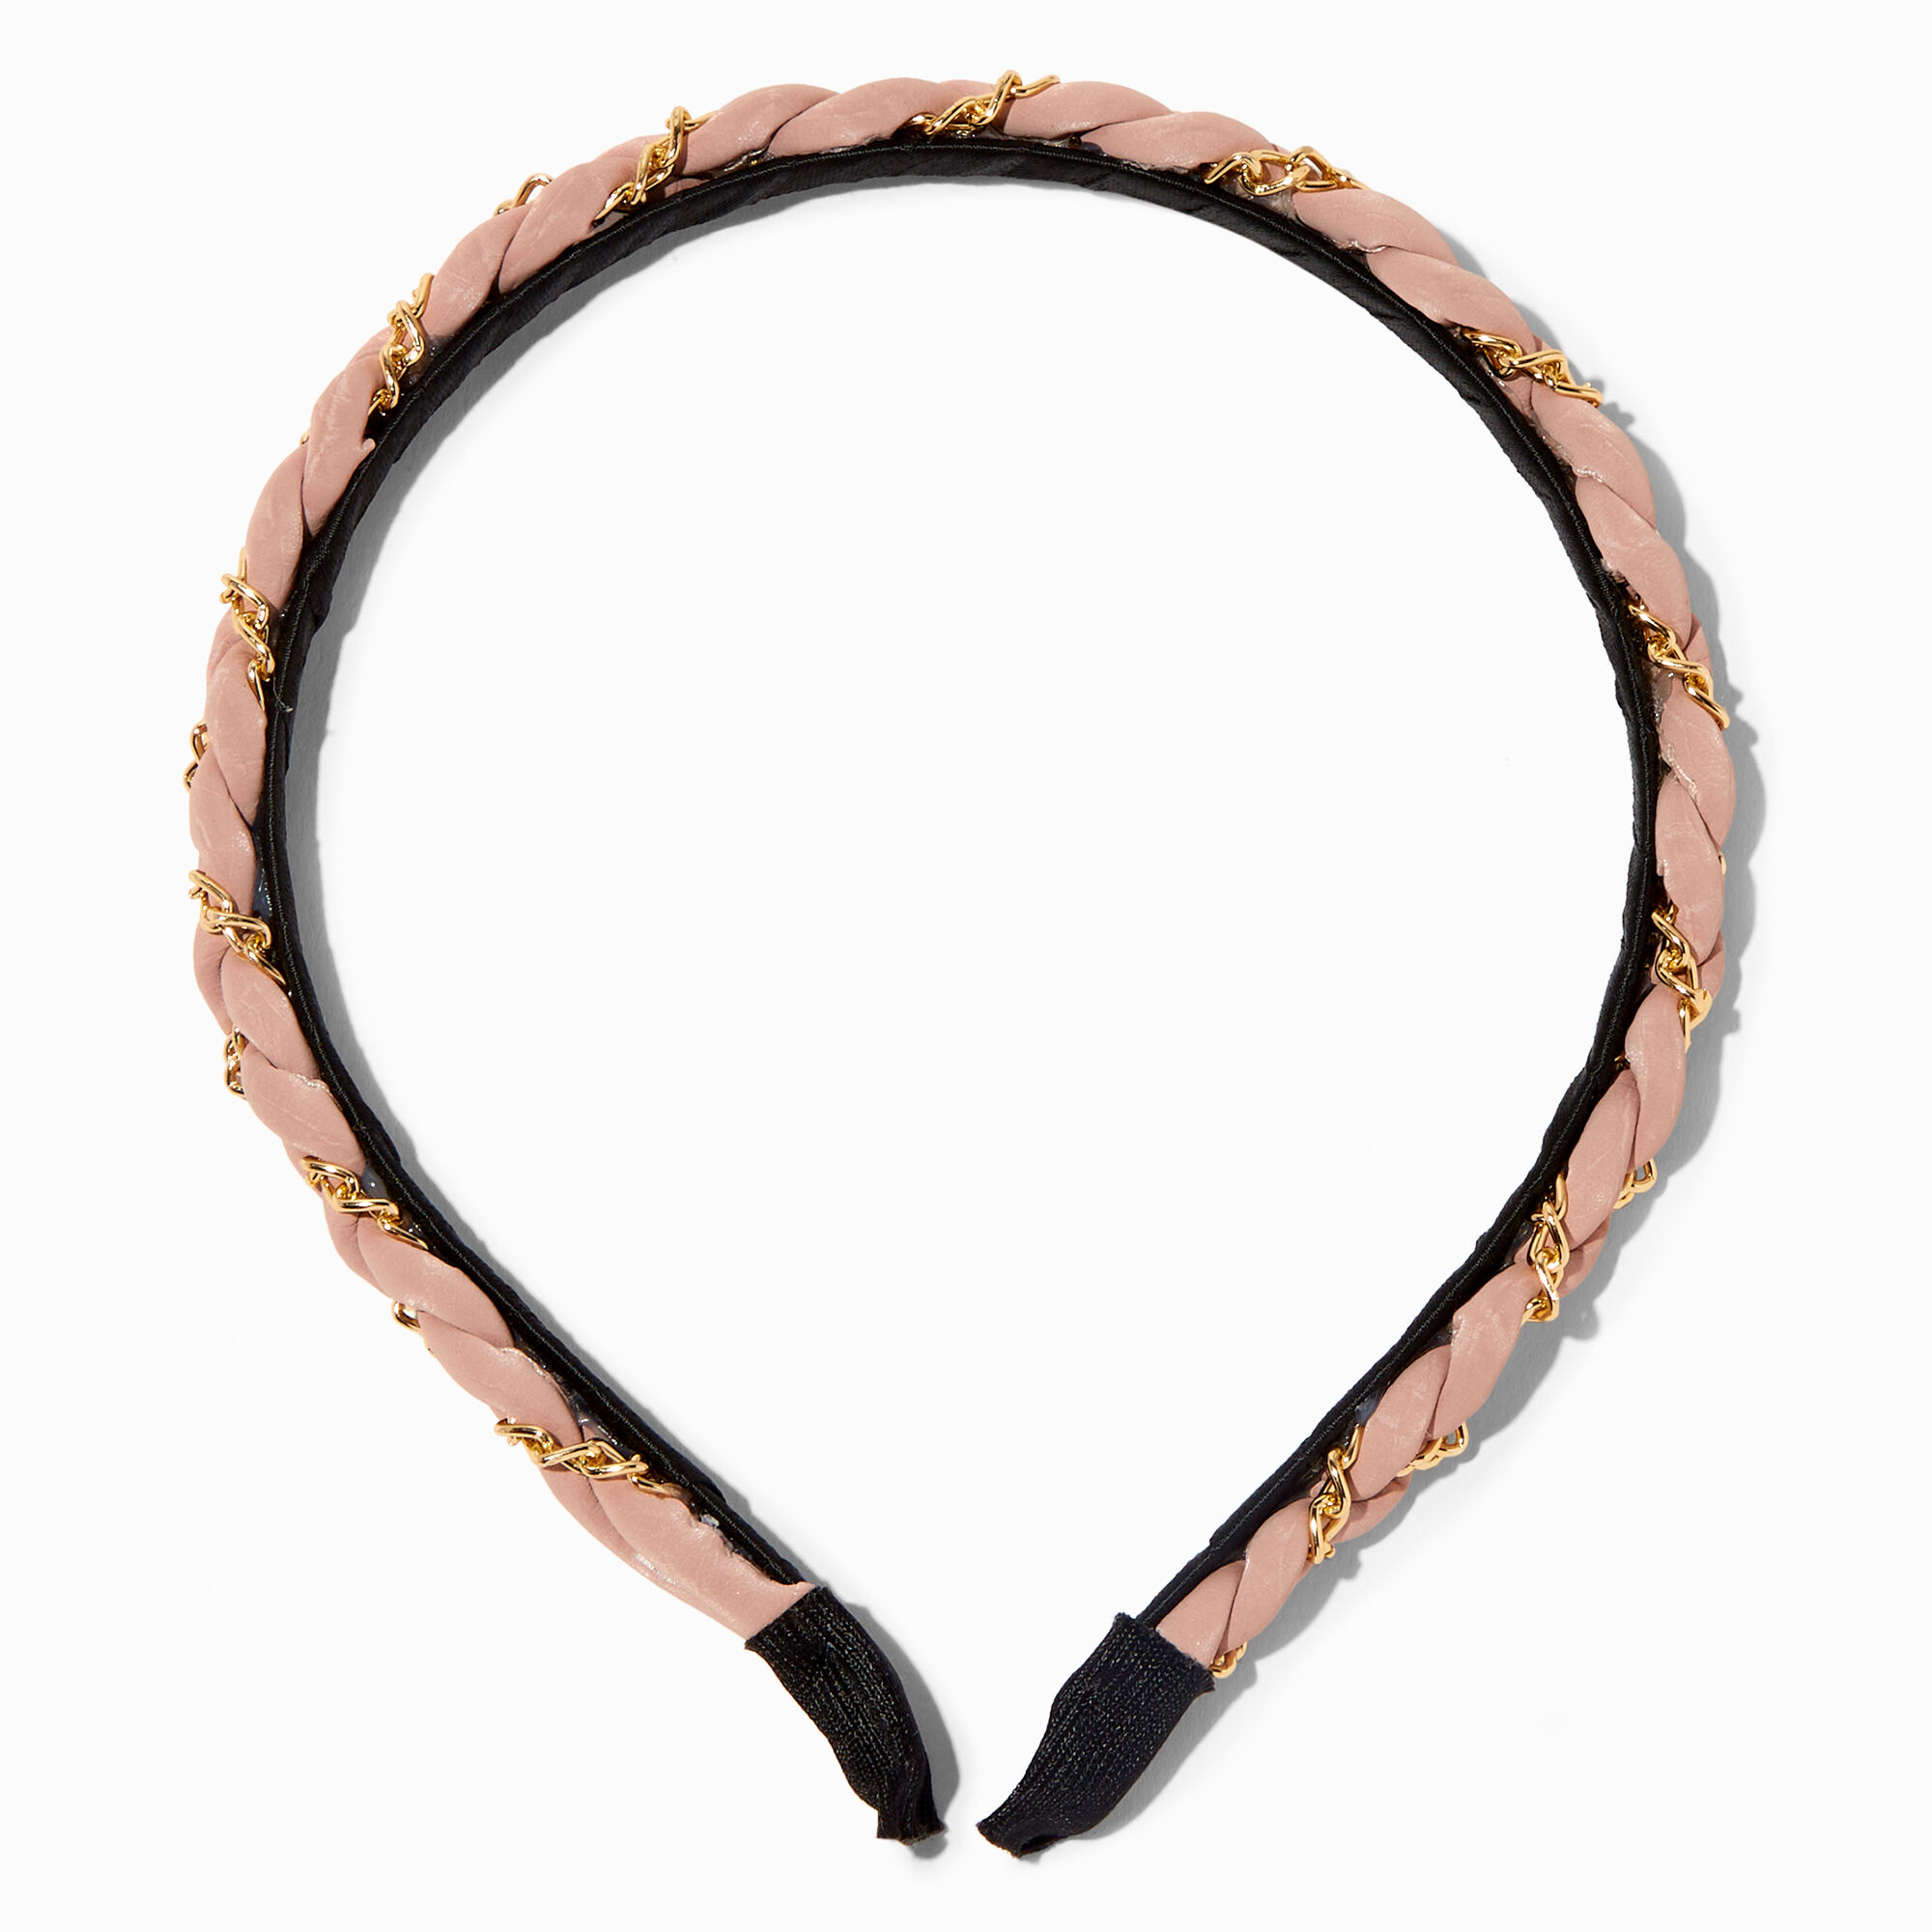 View Claires Blush Gold Chain Woven Headband Pink information